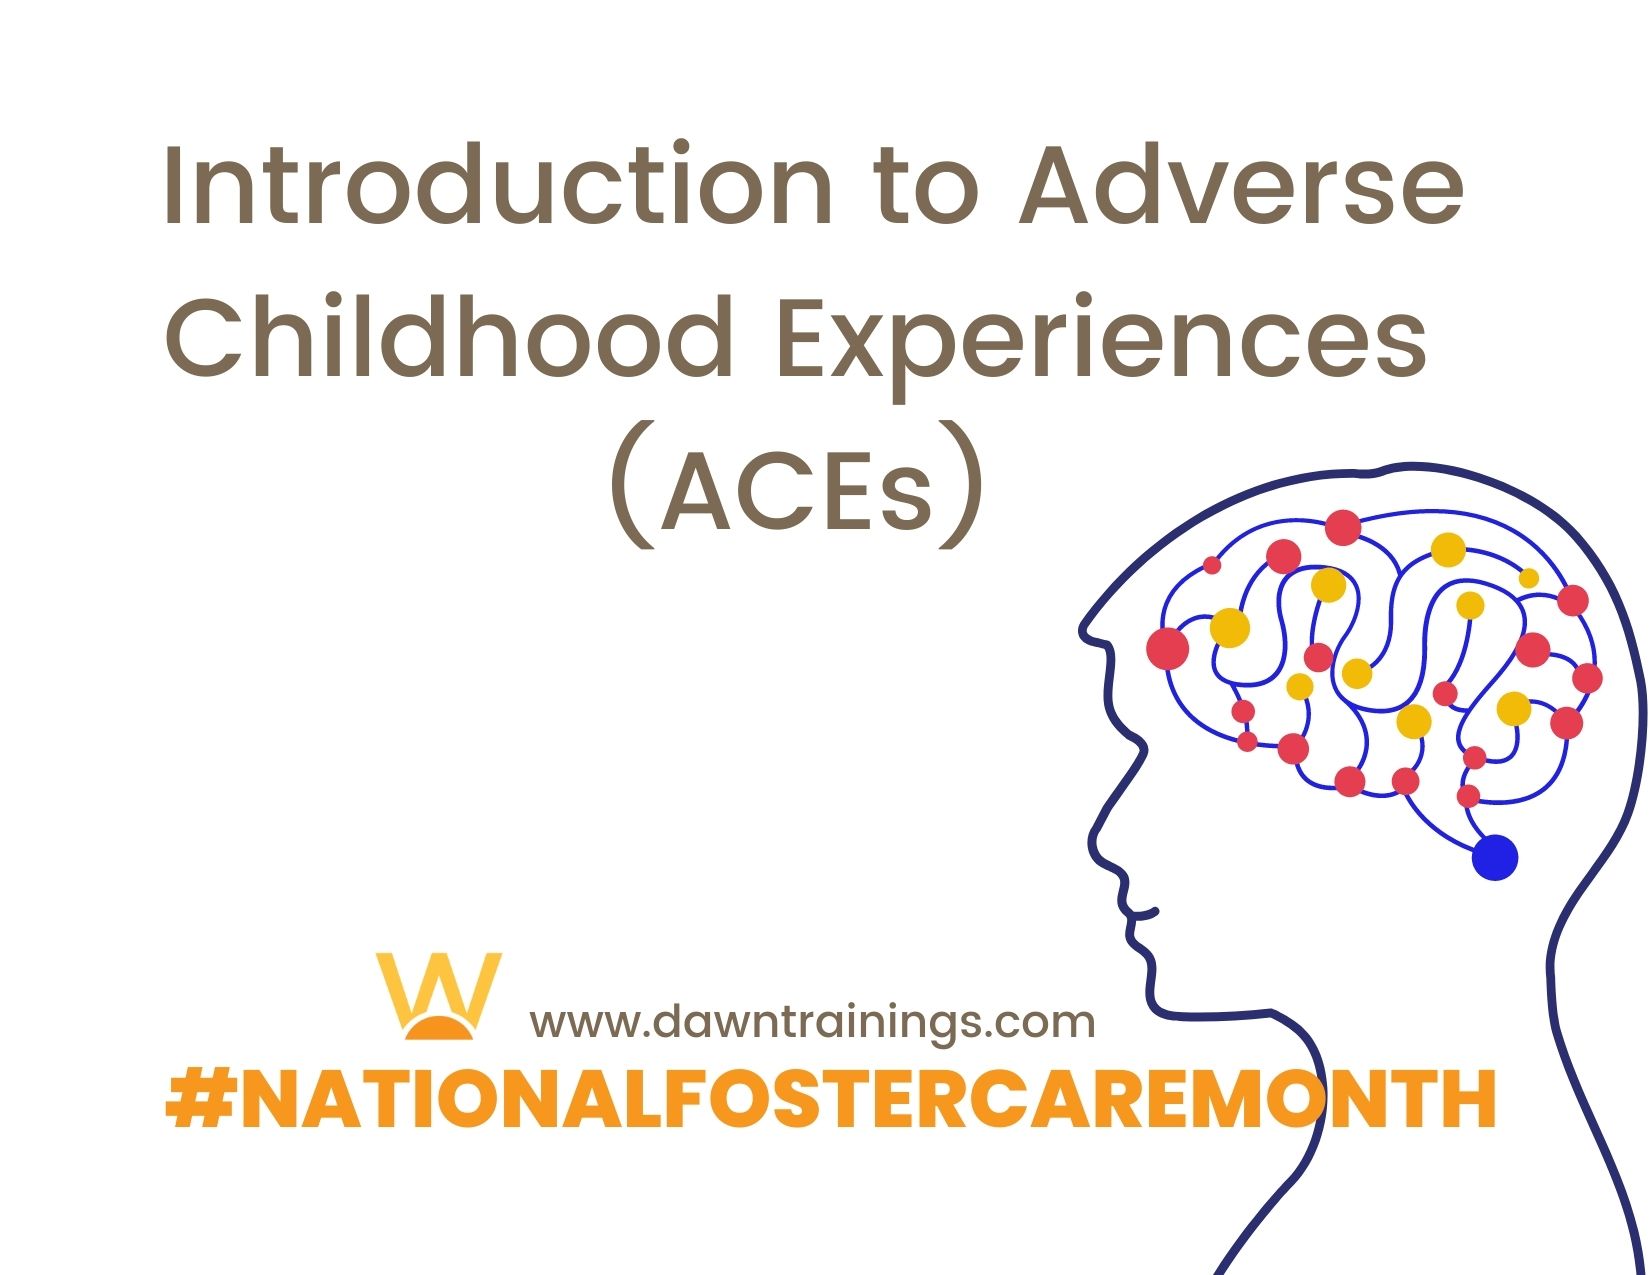 Introduction to Adverse Childhood Experiences